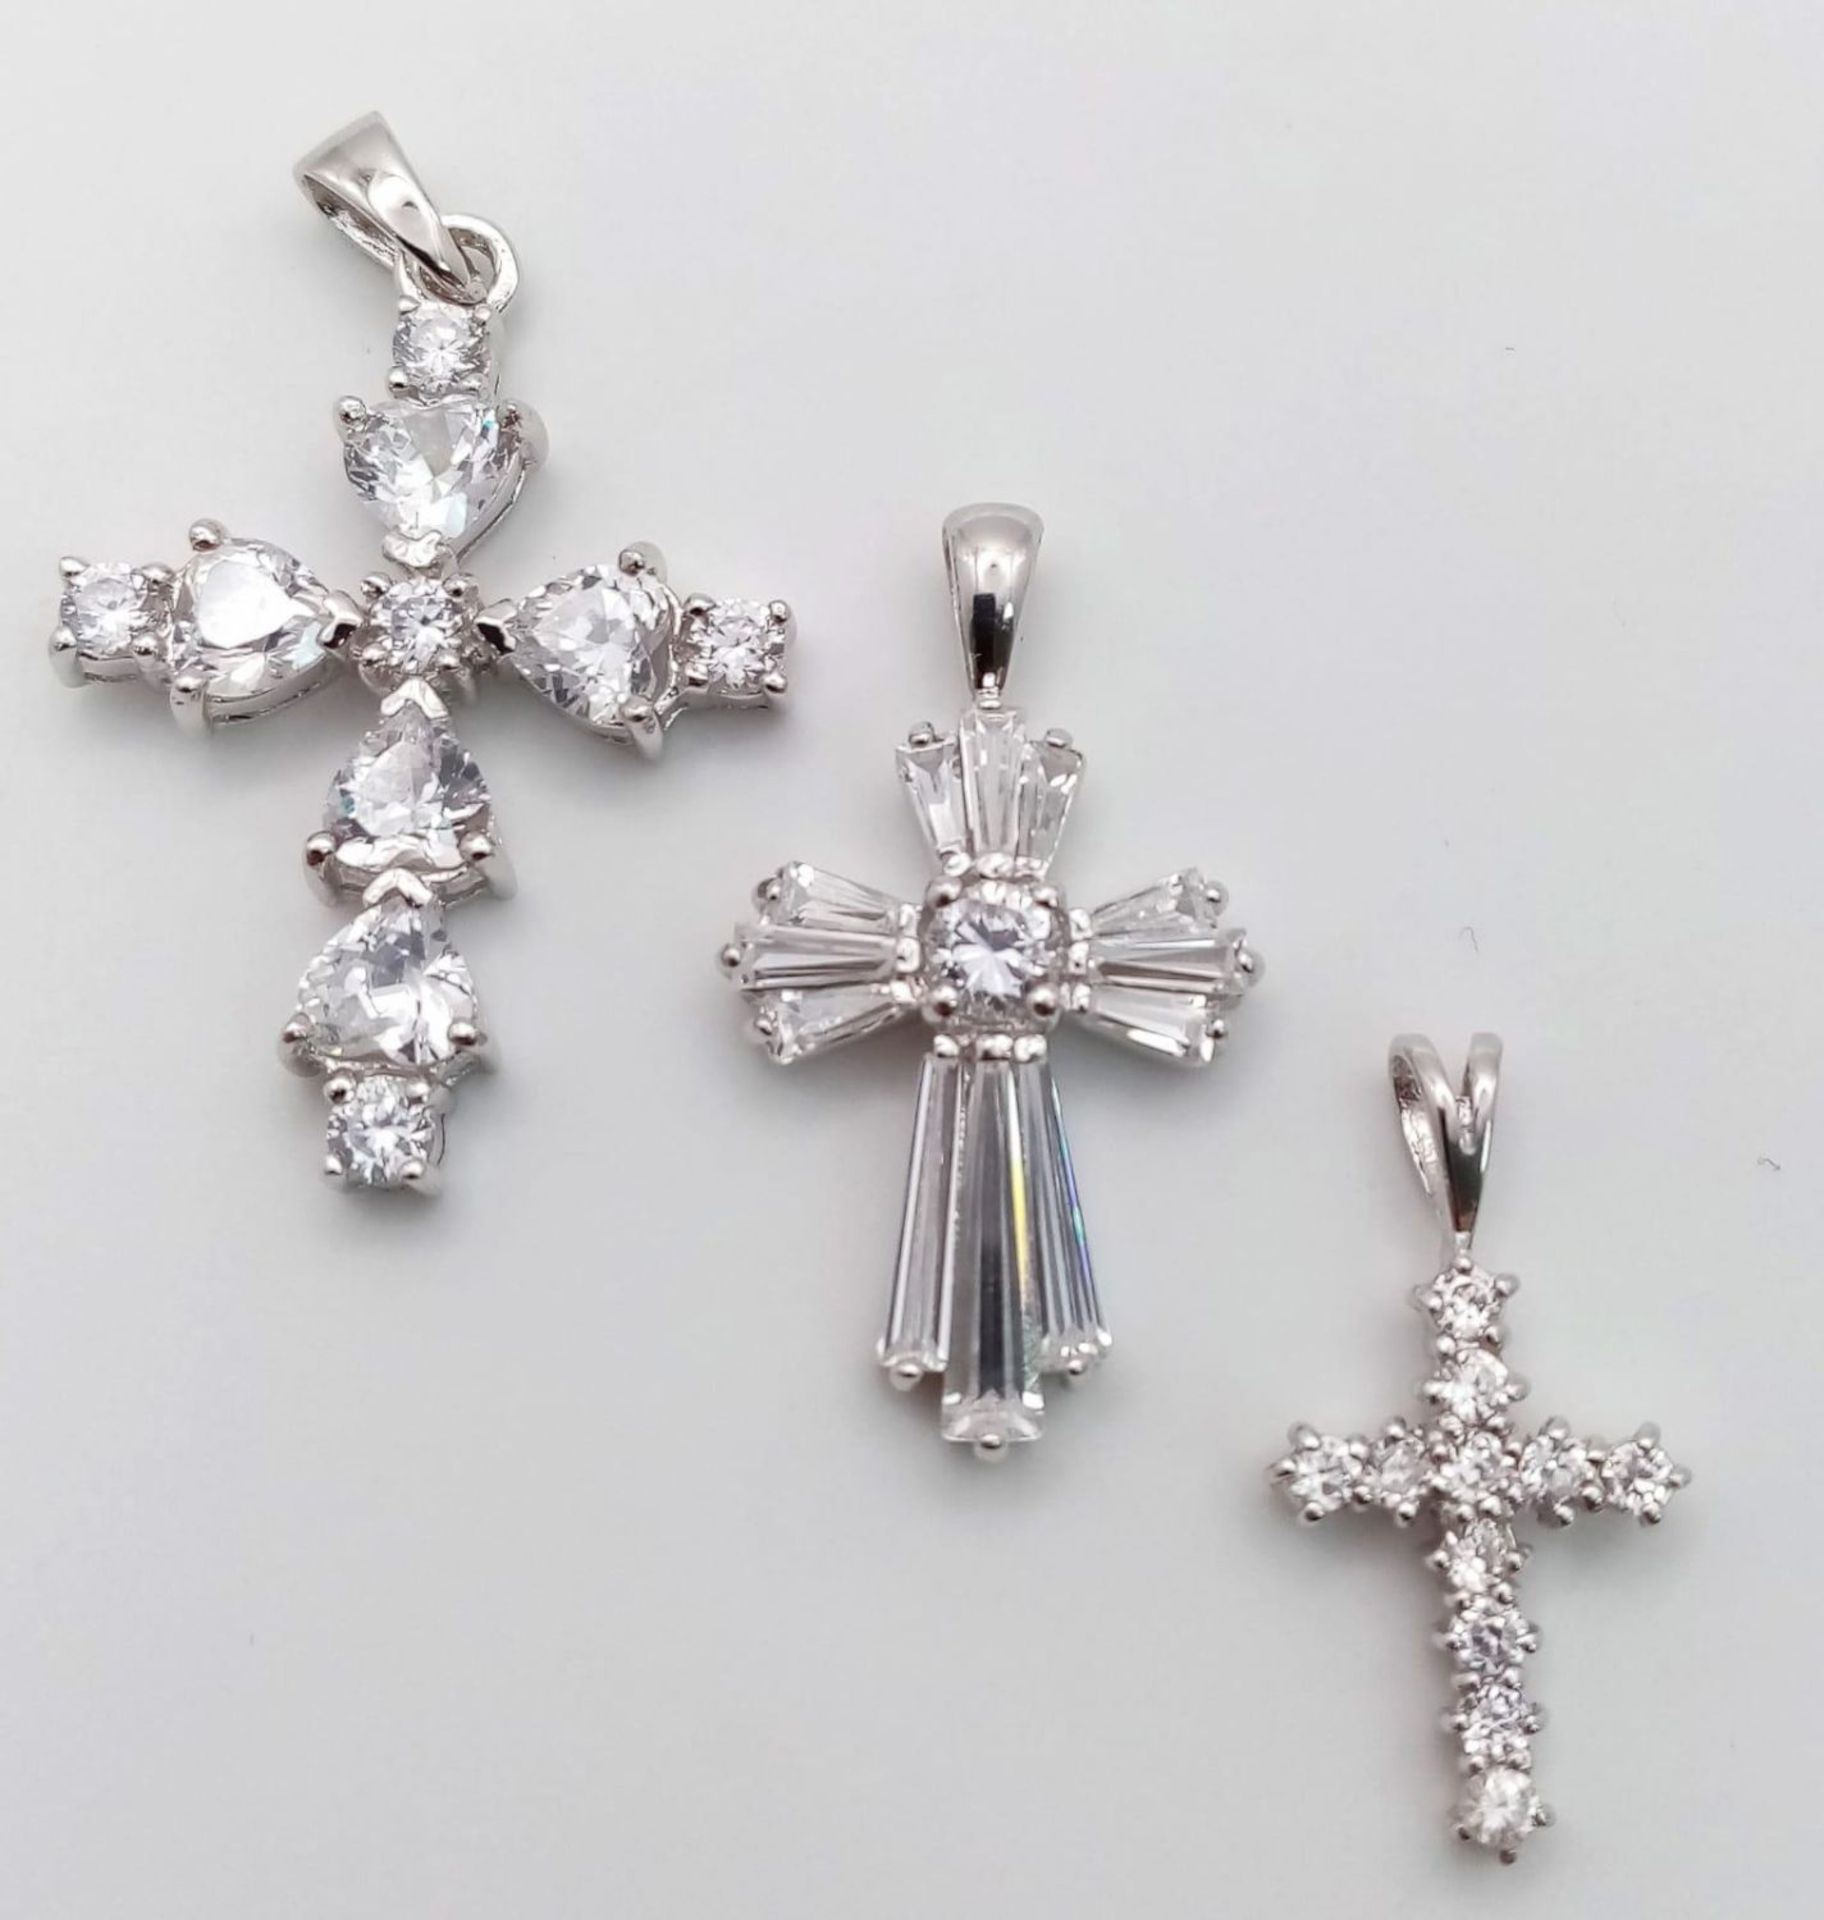 3 X STERLING SILVER STONE SET CROSSES PENDANTS, WEIGHT 8.1G, SEE PHOTOS FOR DETAILS - Image 3 of 12